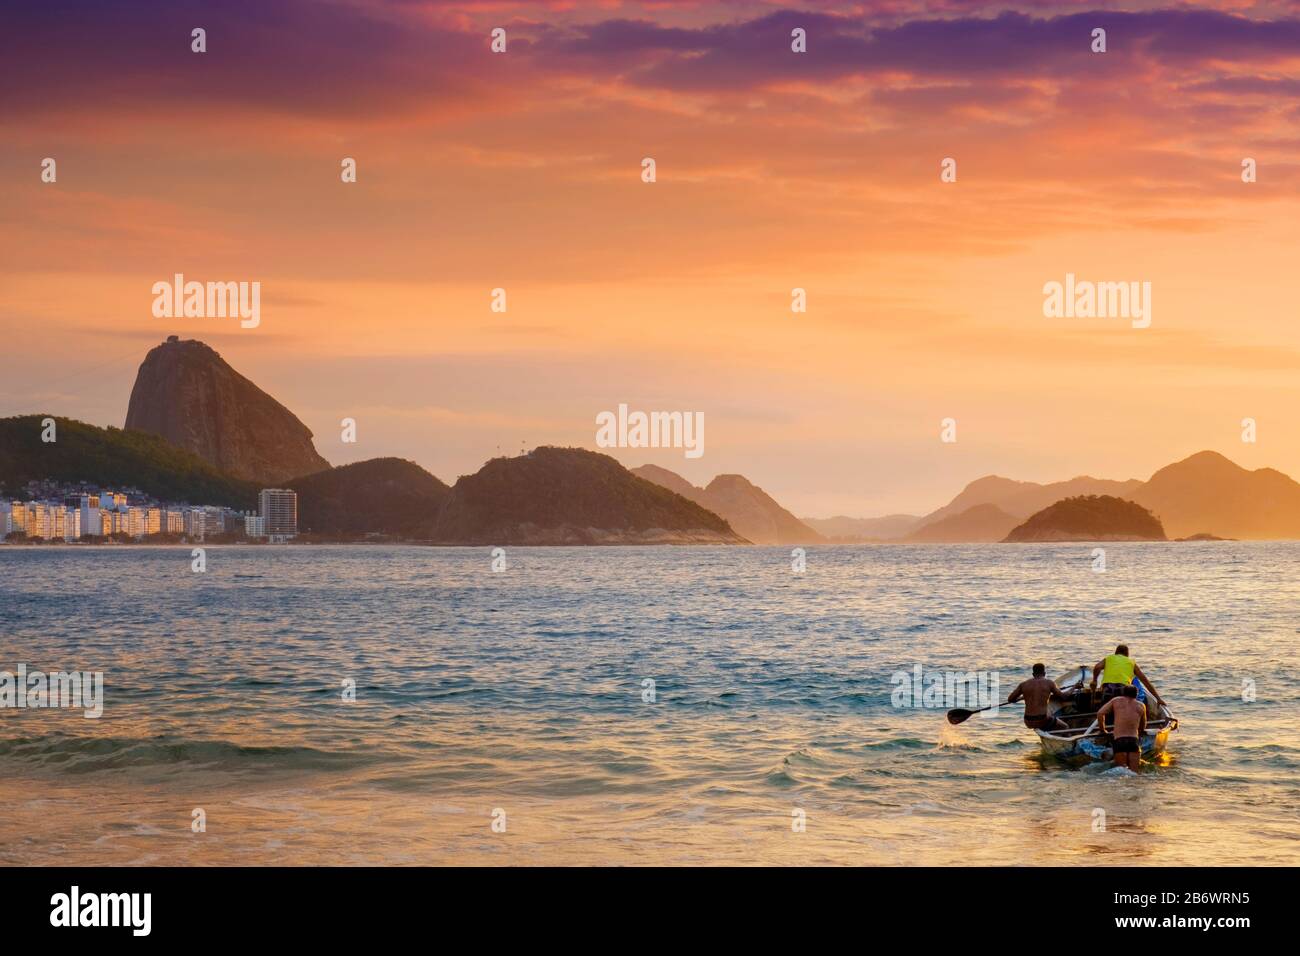 Brazil, Rio, Rio de Janeiro. Fishermen launching a boat with the Sugar Loaf, Leme hill and the mountains of Rio de Janeiro behind Stock Photo